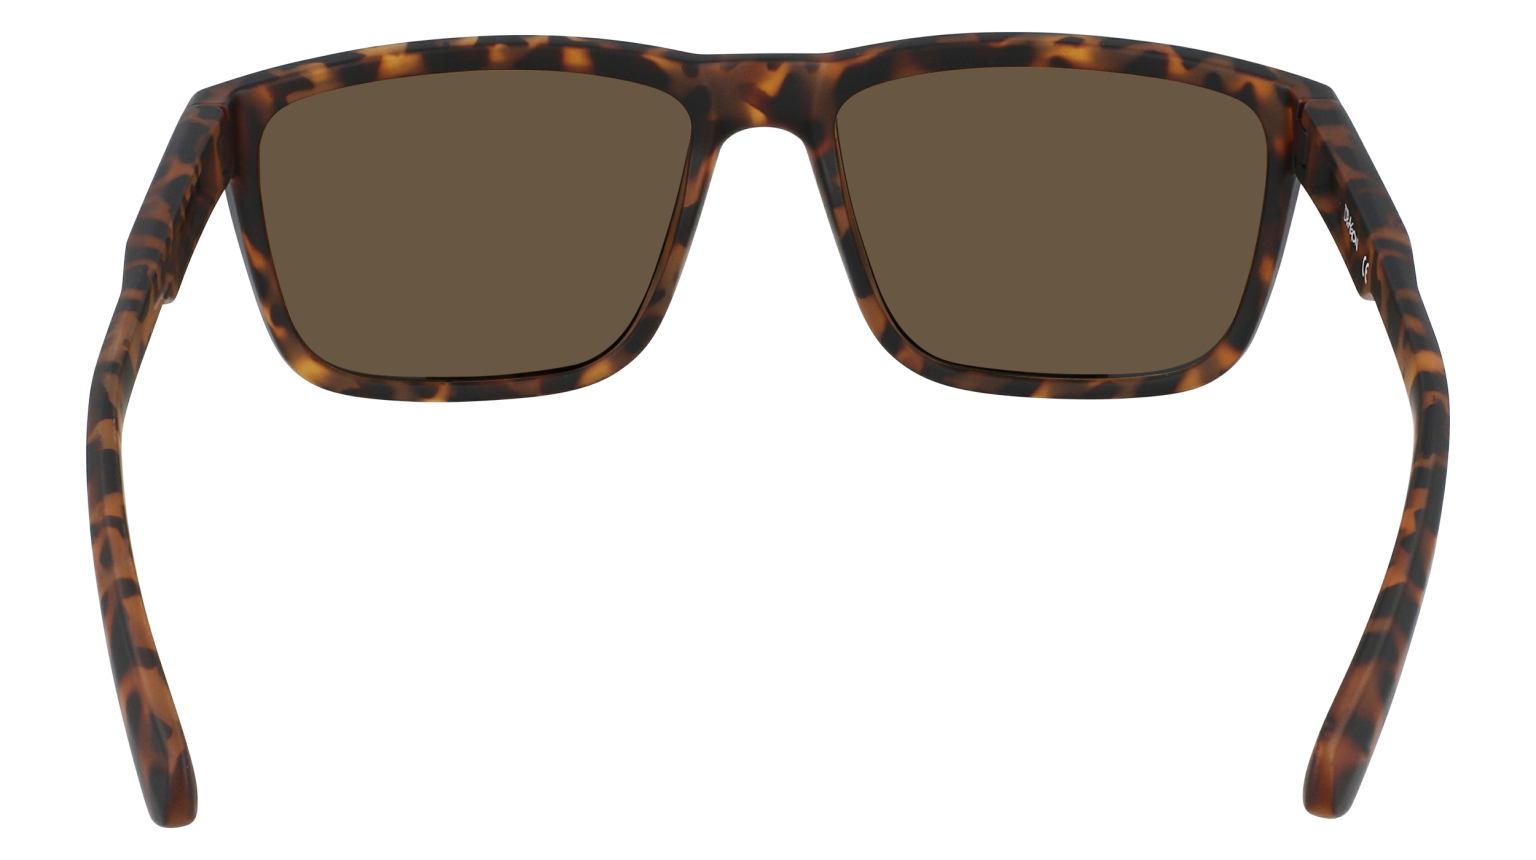 REED XL - Matte Tortoise with Lumalens Brown Lens